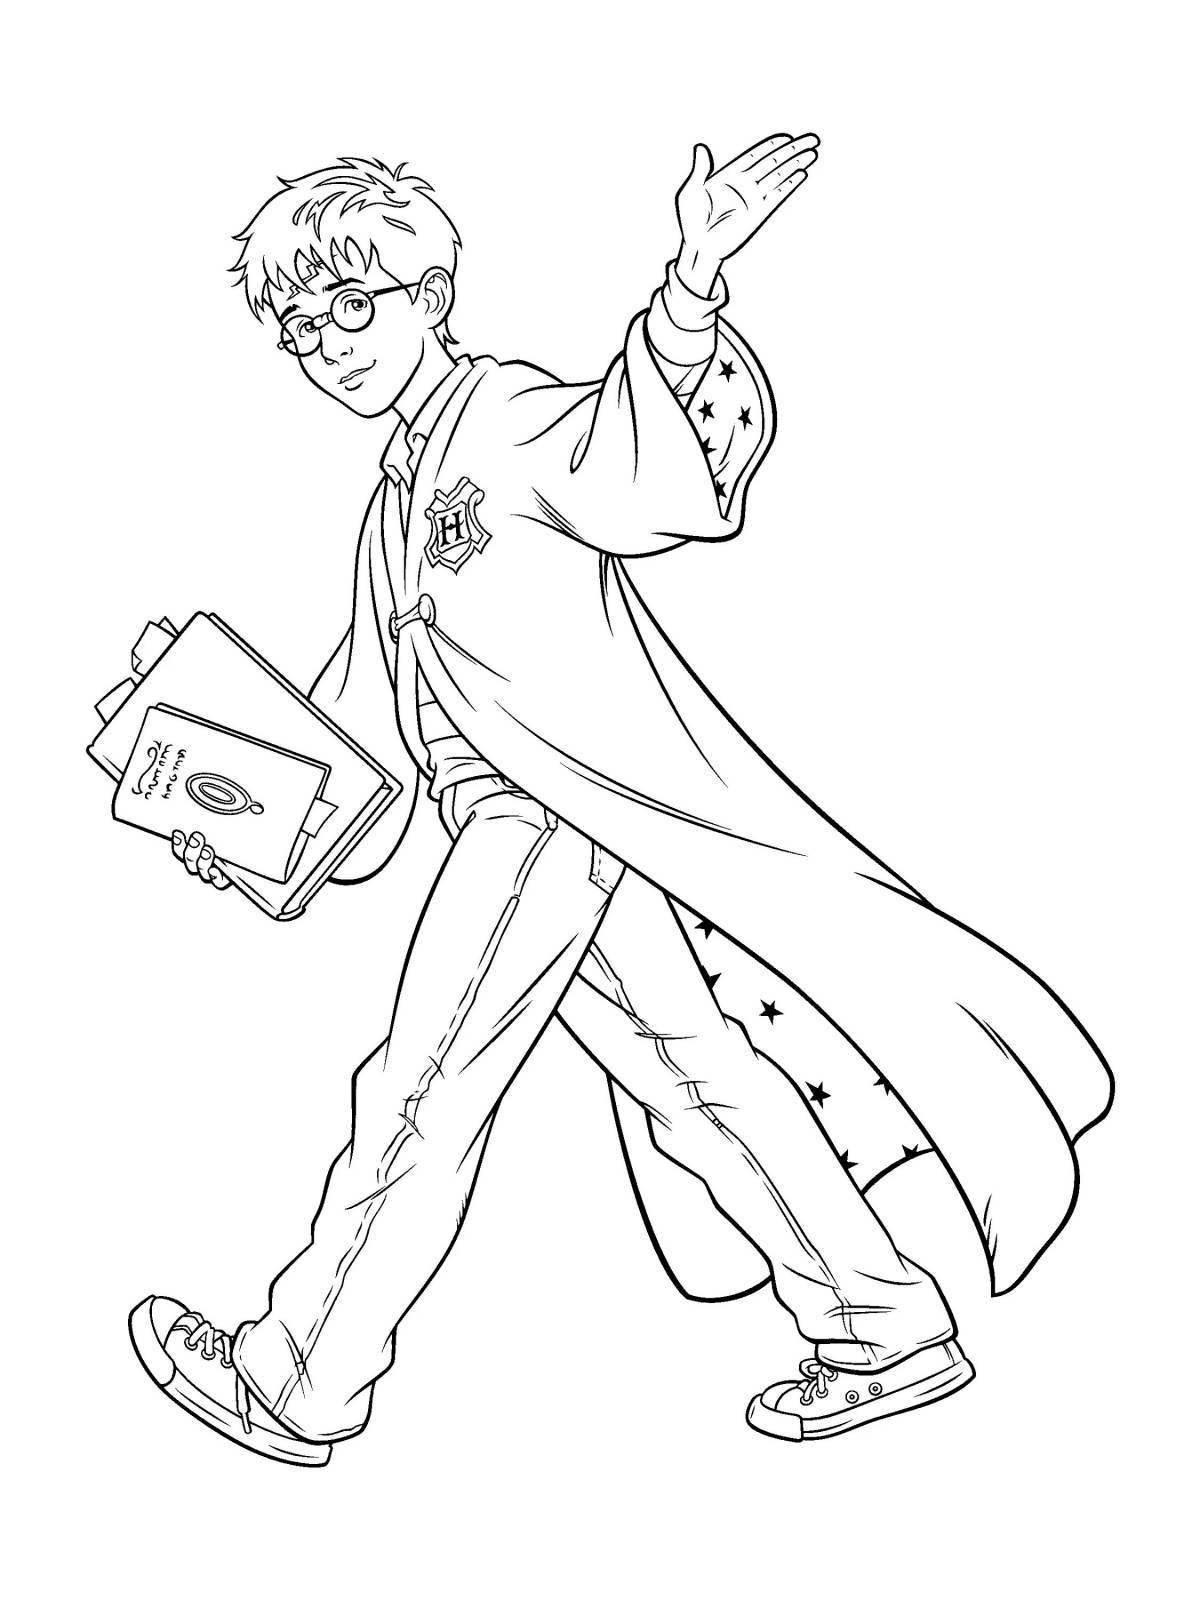 Harry potter humorous coloring book